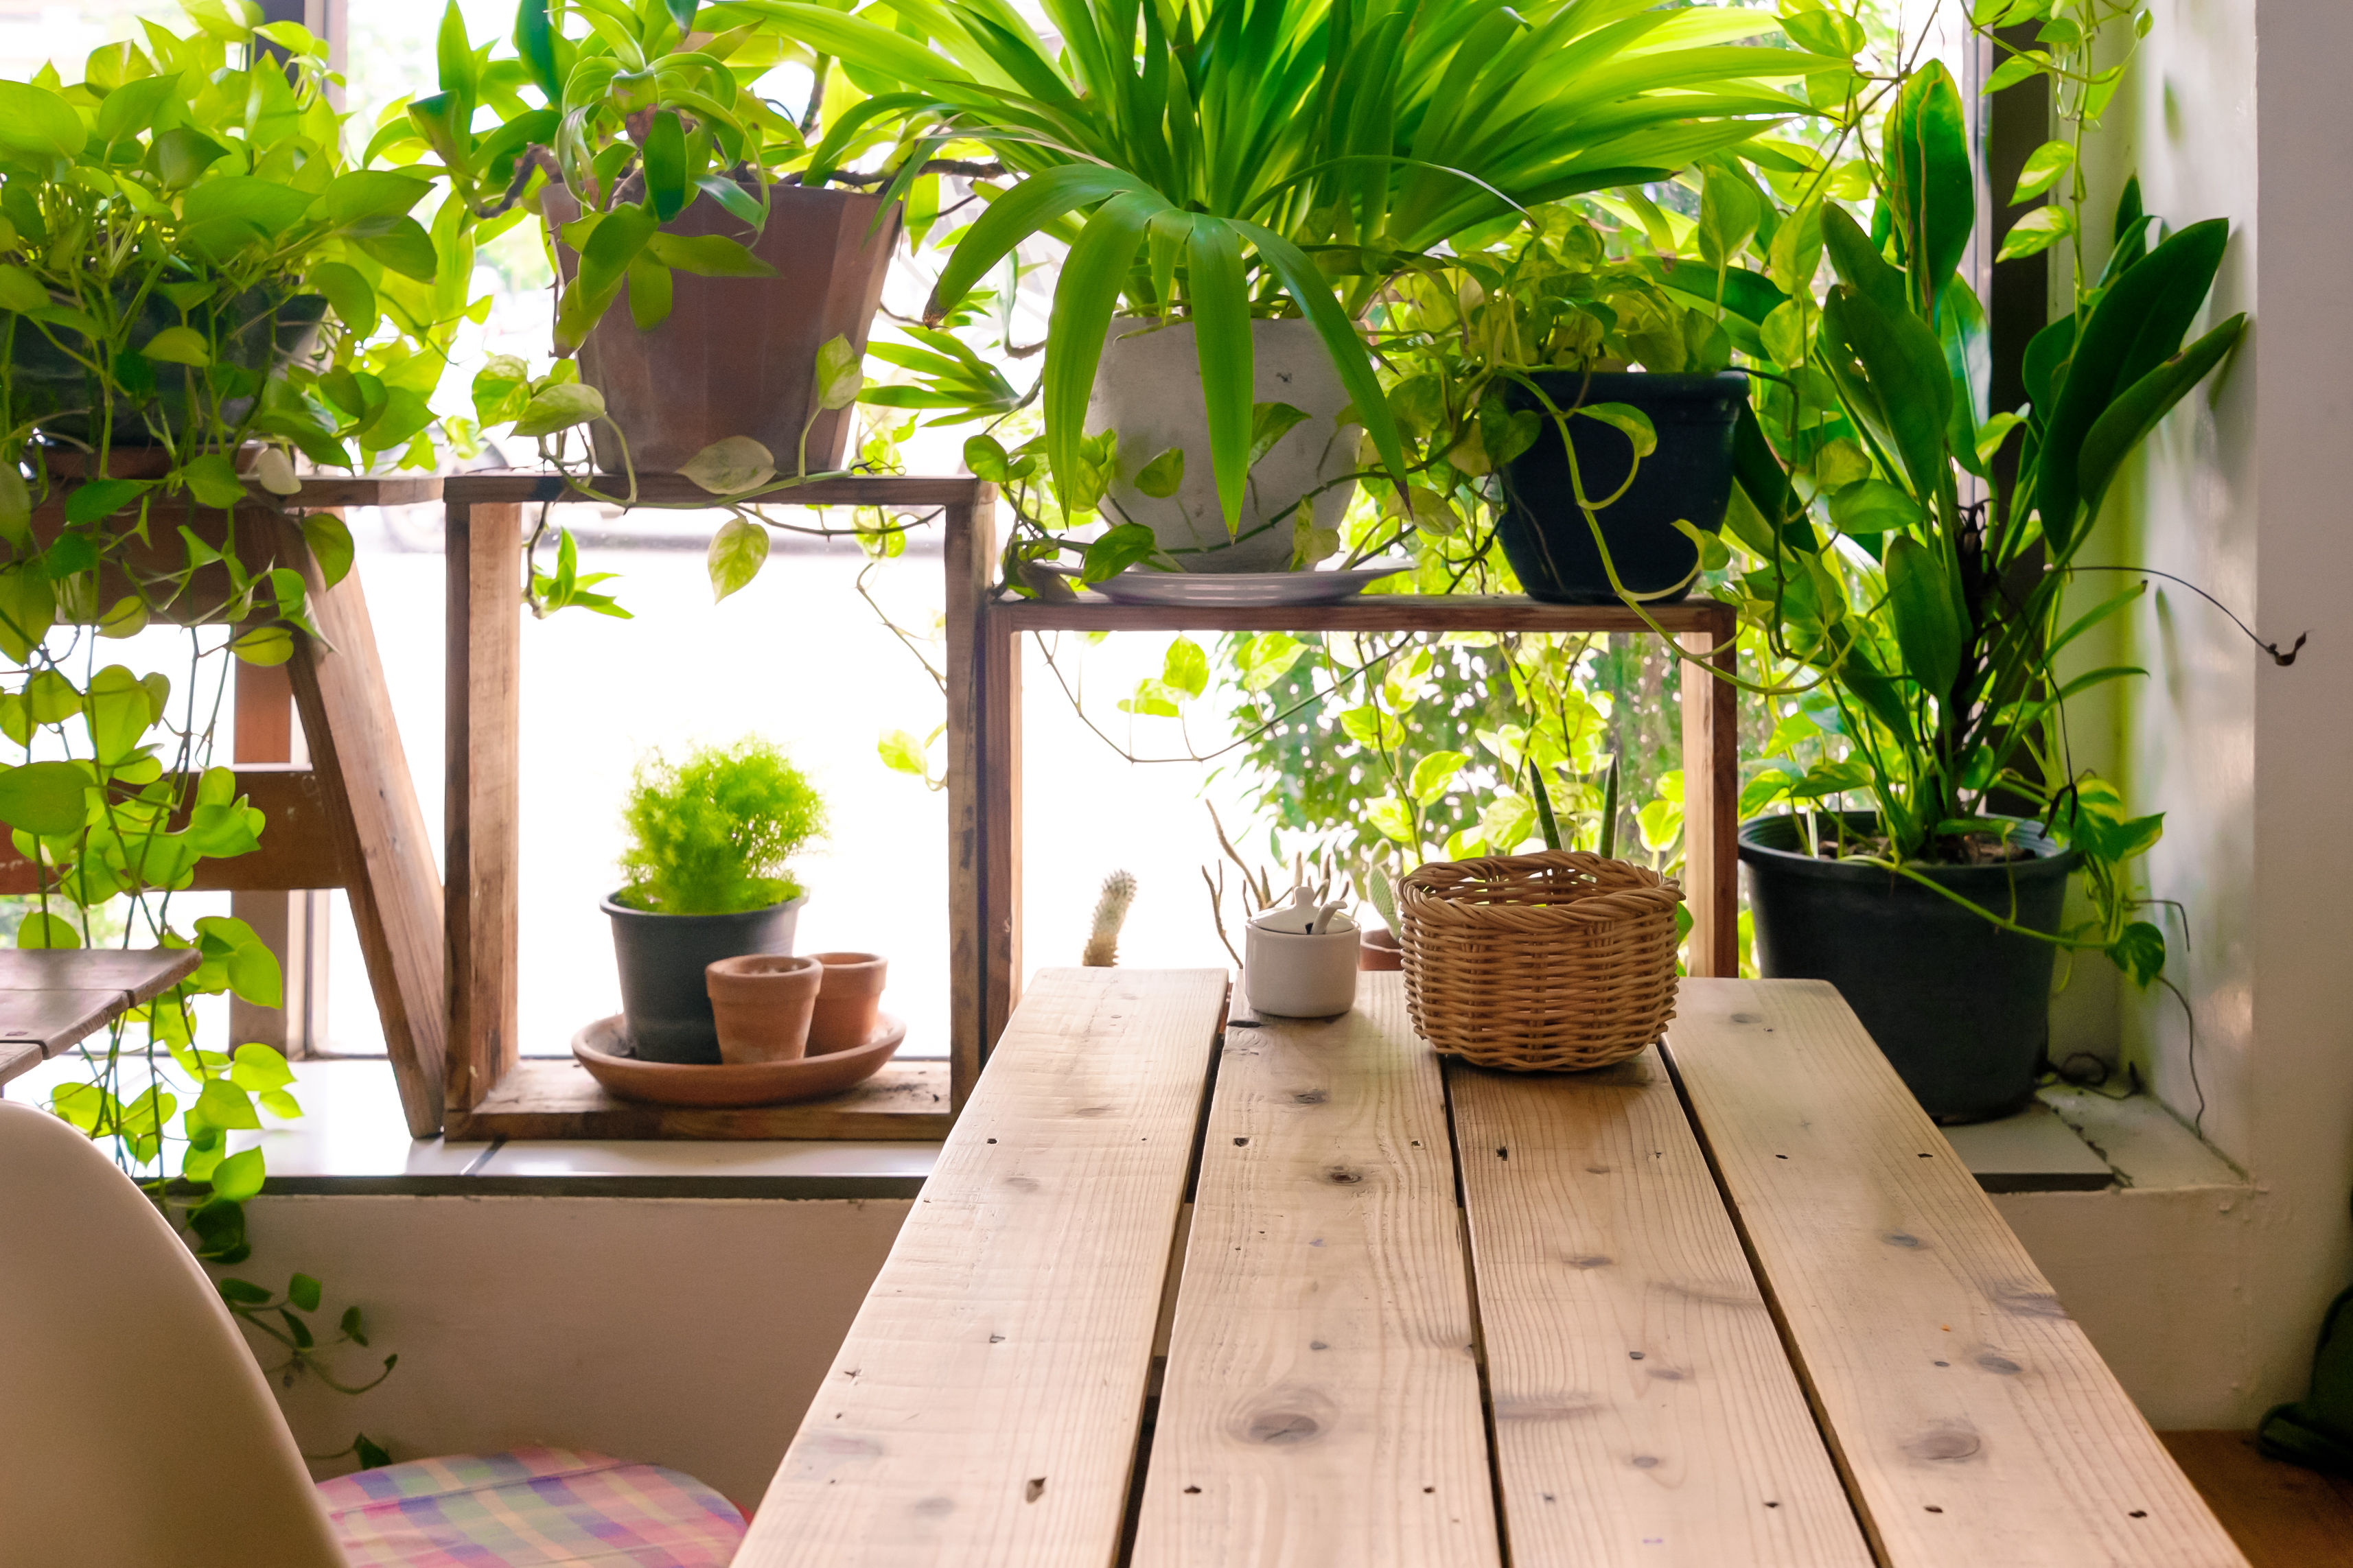 Growing an indoor garden: Tips to ‘Make a Plant Love You’ | WTOP News